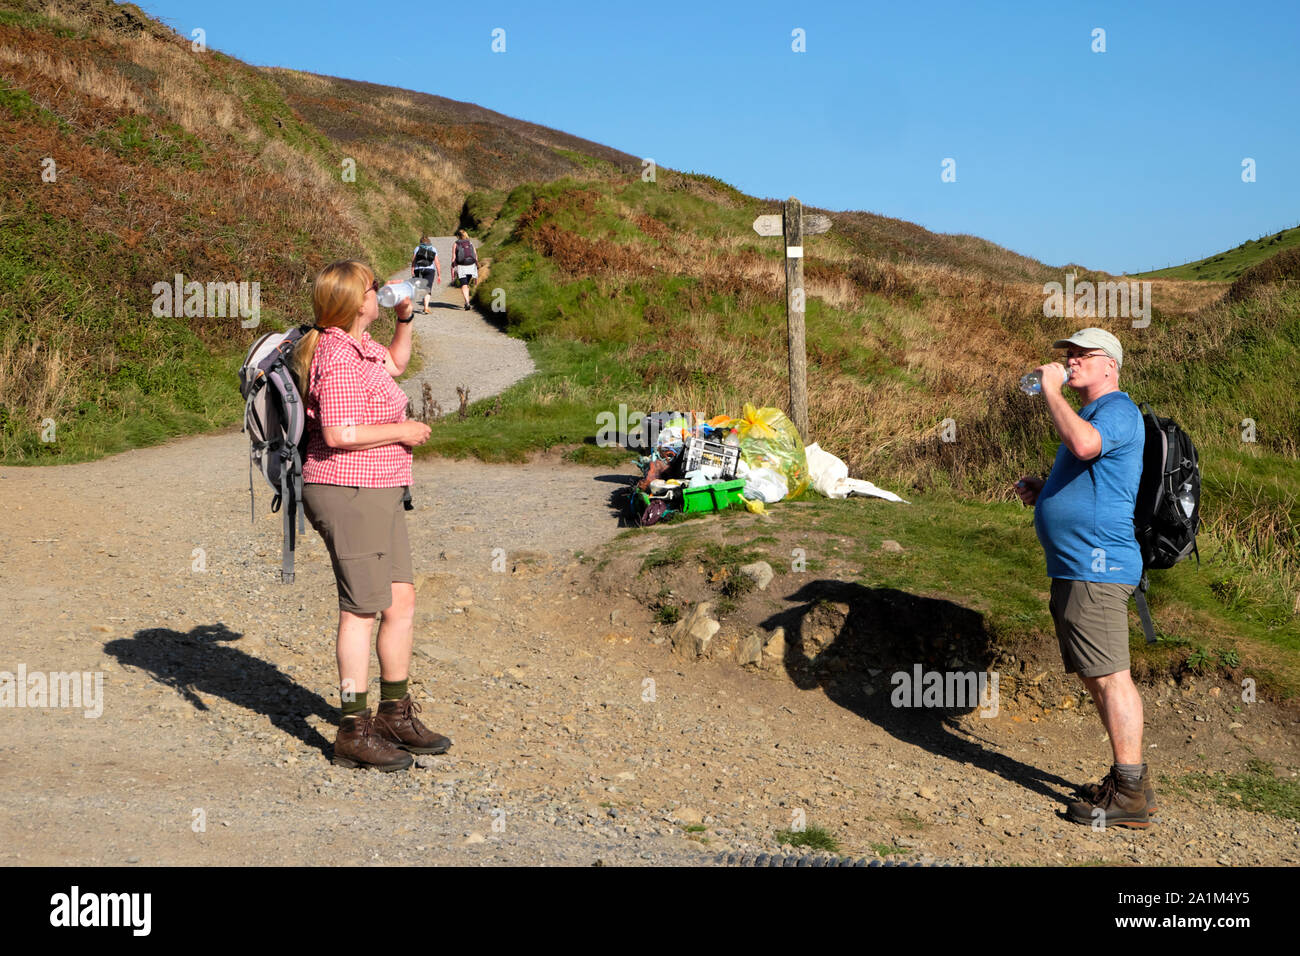 Walkers drinking water from plastic bottles & rubbish collection collected from the beach at Marloes Wales Coastal Path Pembrokeshire UK  KATHY DEWITT Stock Photo